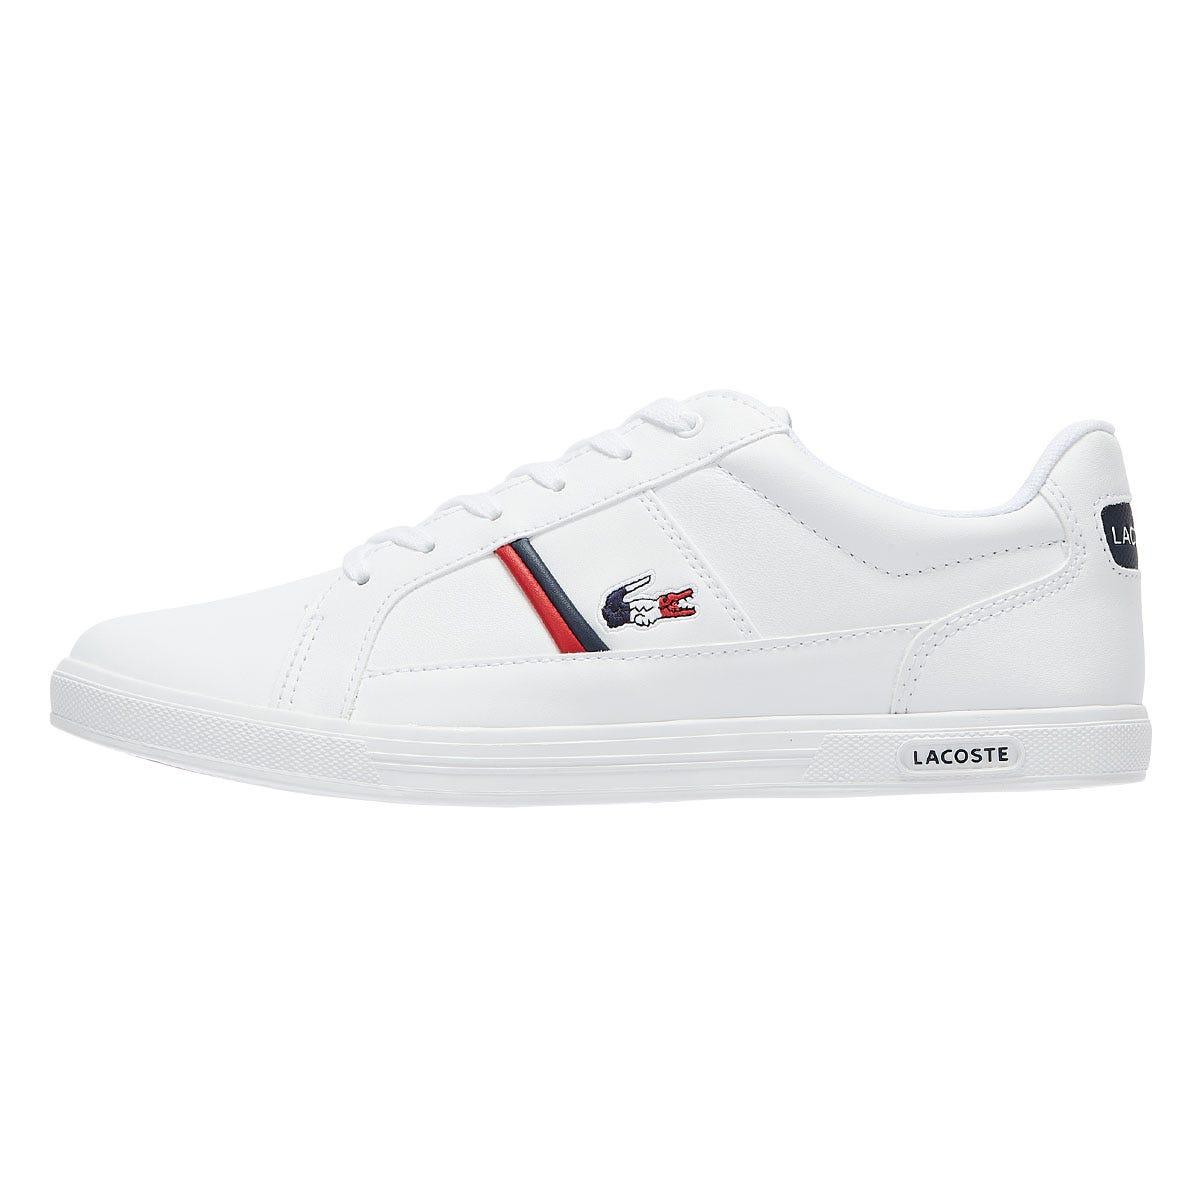 Lacoste Leather Europa Tri 1 Trainers in for Men - Lyst